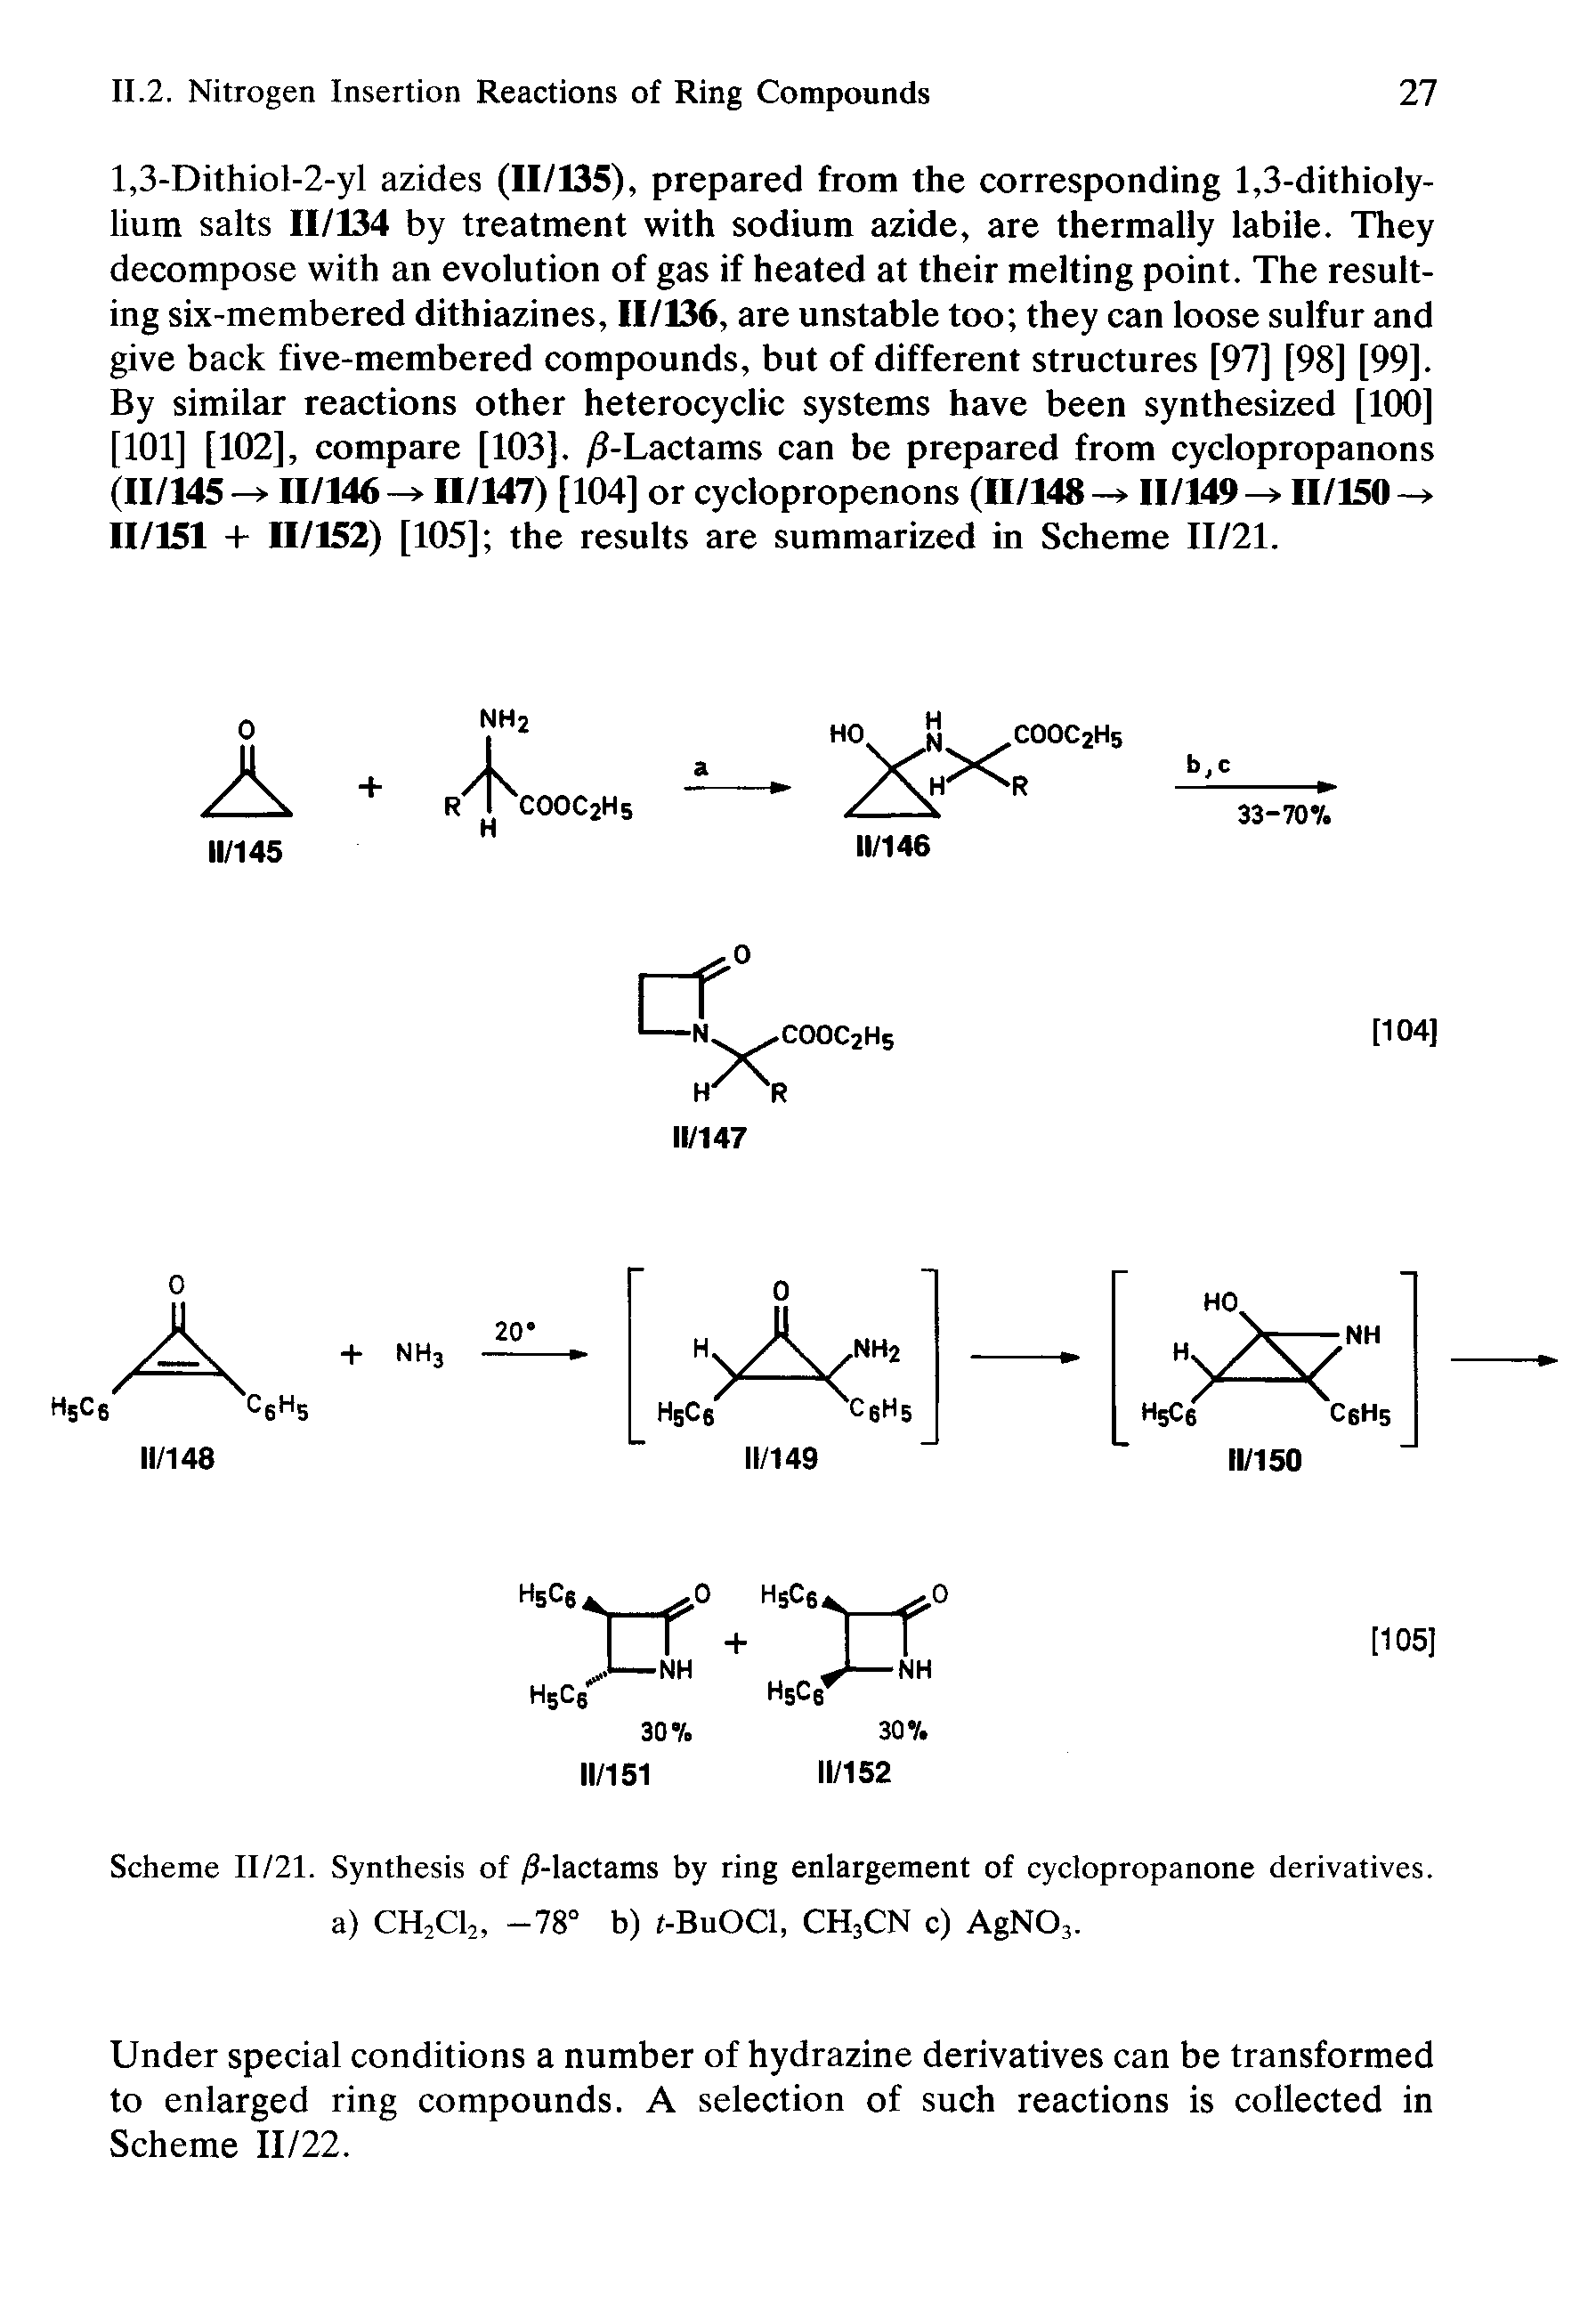 Scheme 11/21. Synthesis of /3-lactams by ring enlargement of cyclopropanone derivatives, a) CH2C12, -78° b) /-BuOCl, CH3CN c) AgNQ3.